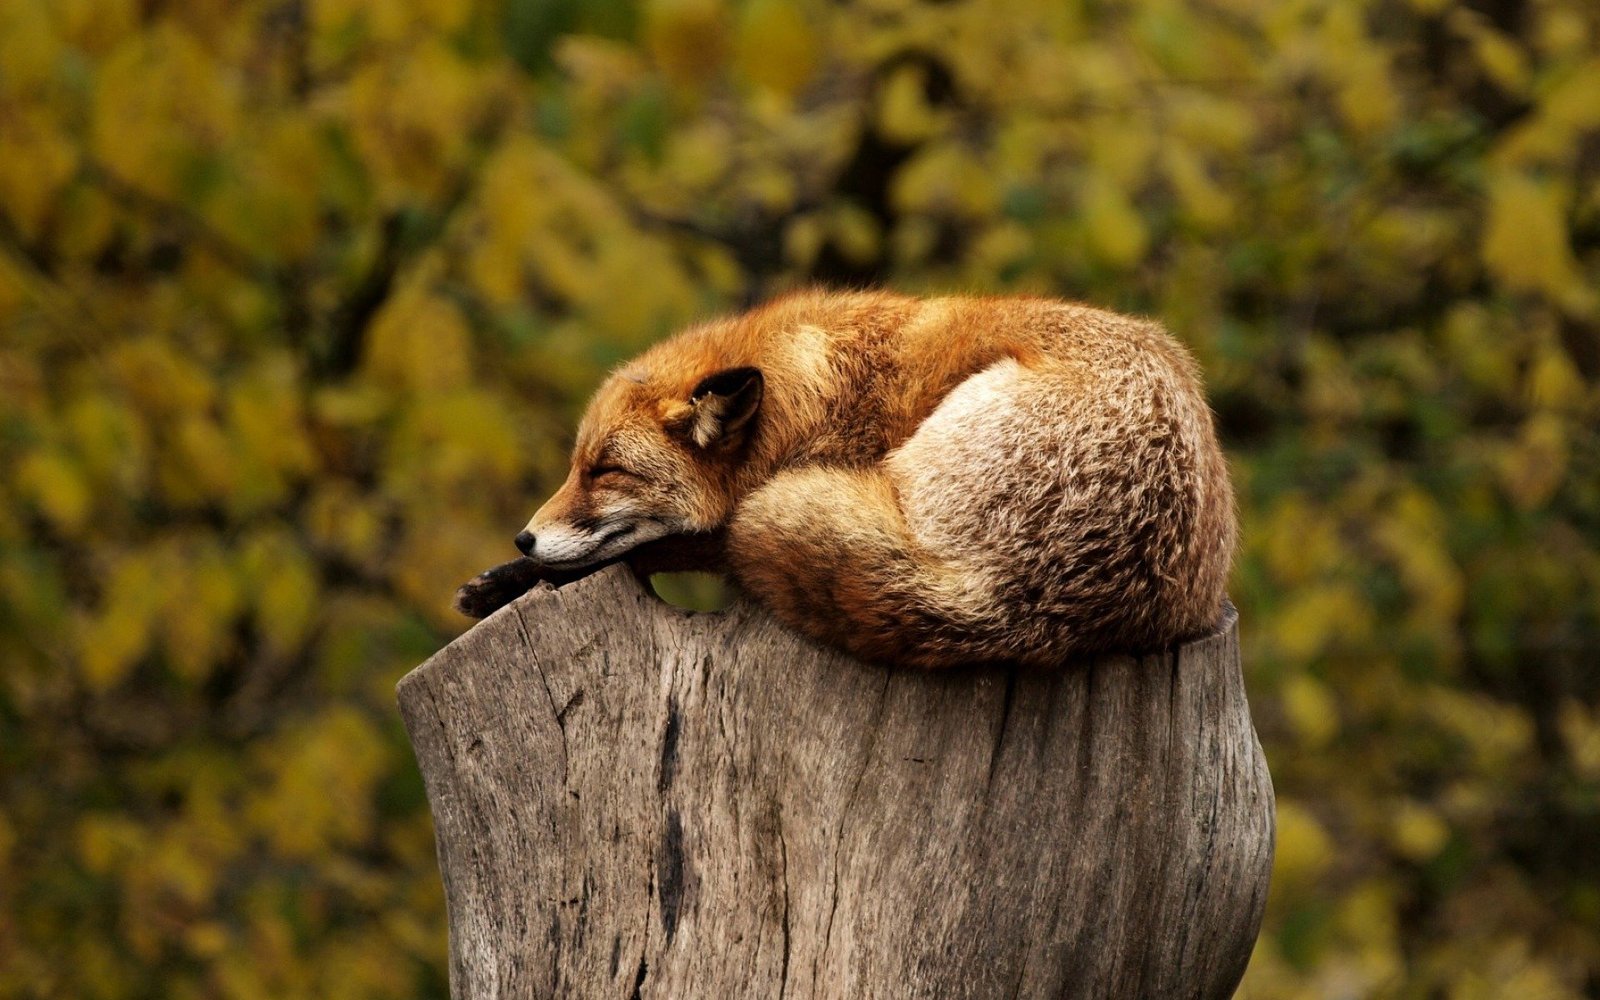 A fox sleeping soundly, resting up so that he can have a good run later.